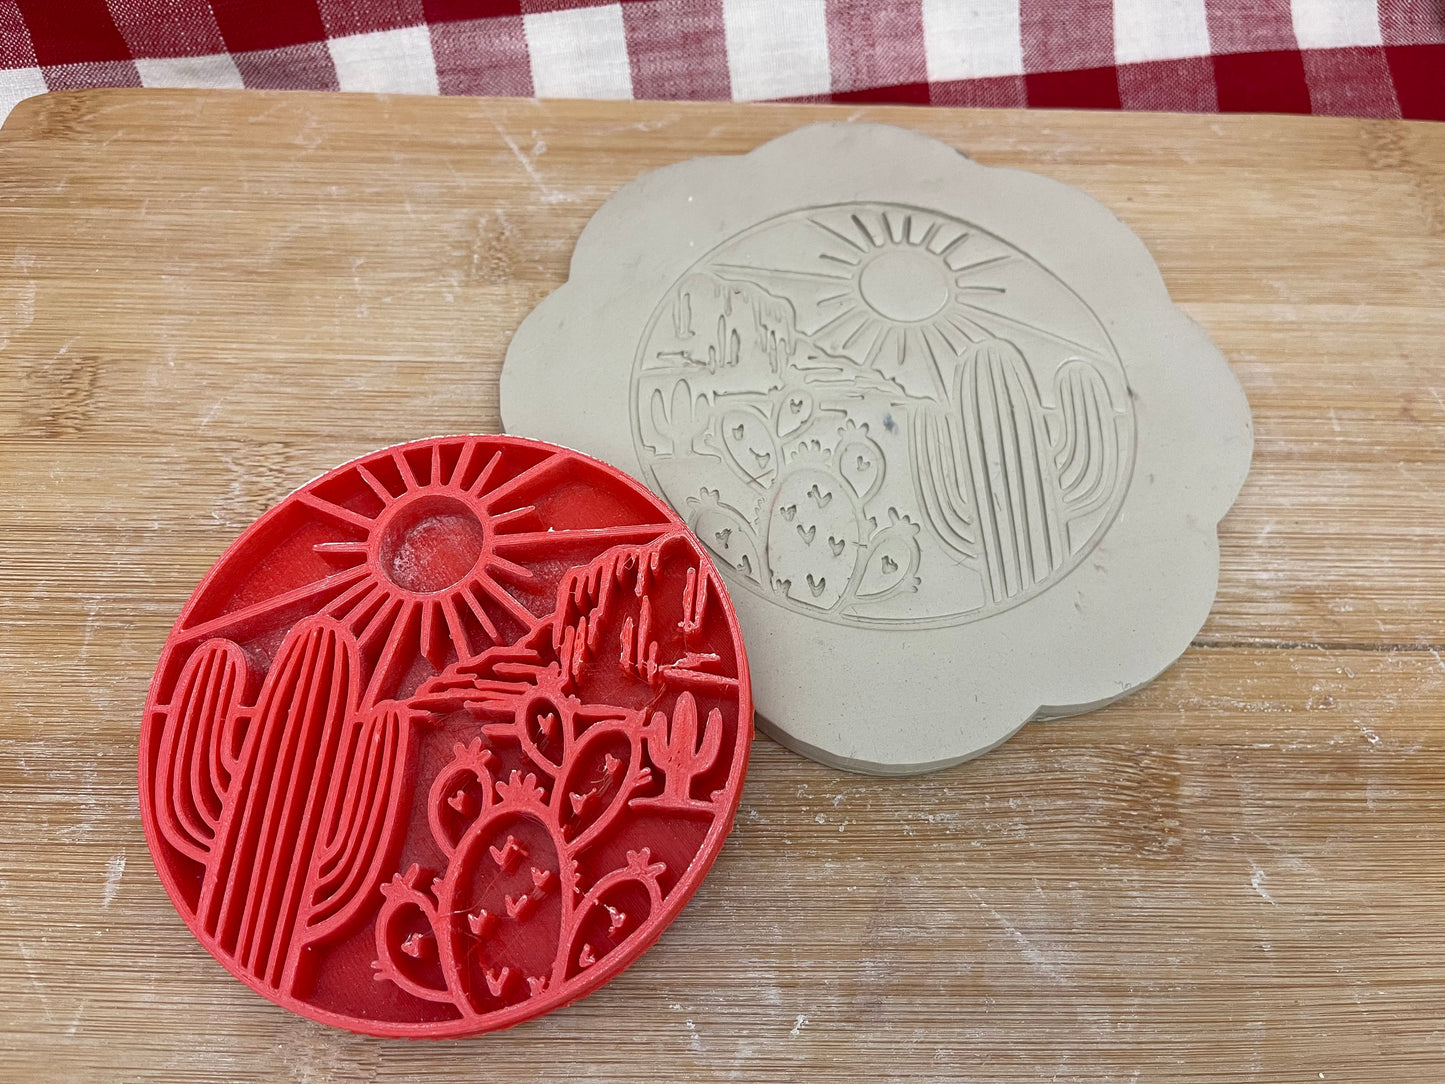 Cactus Desert Scene Pottery Stamp - plastic 3d printed, multiple sizes available